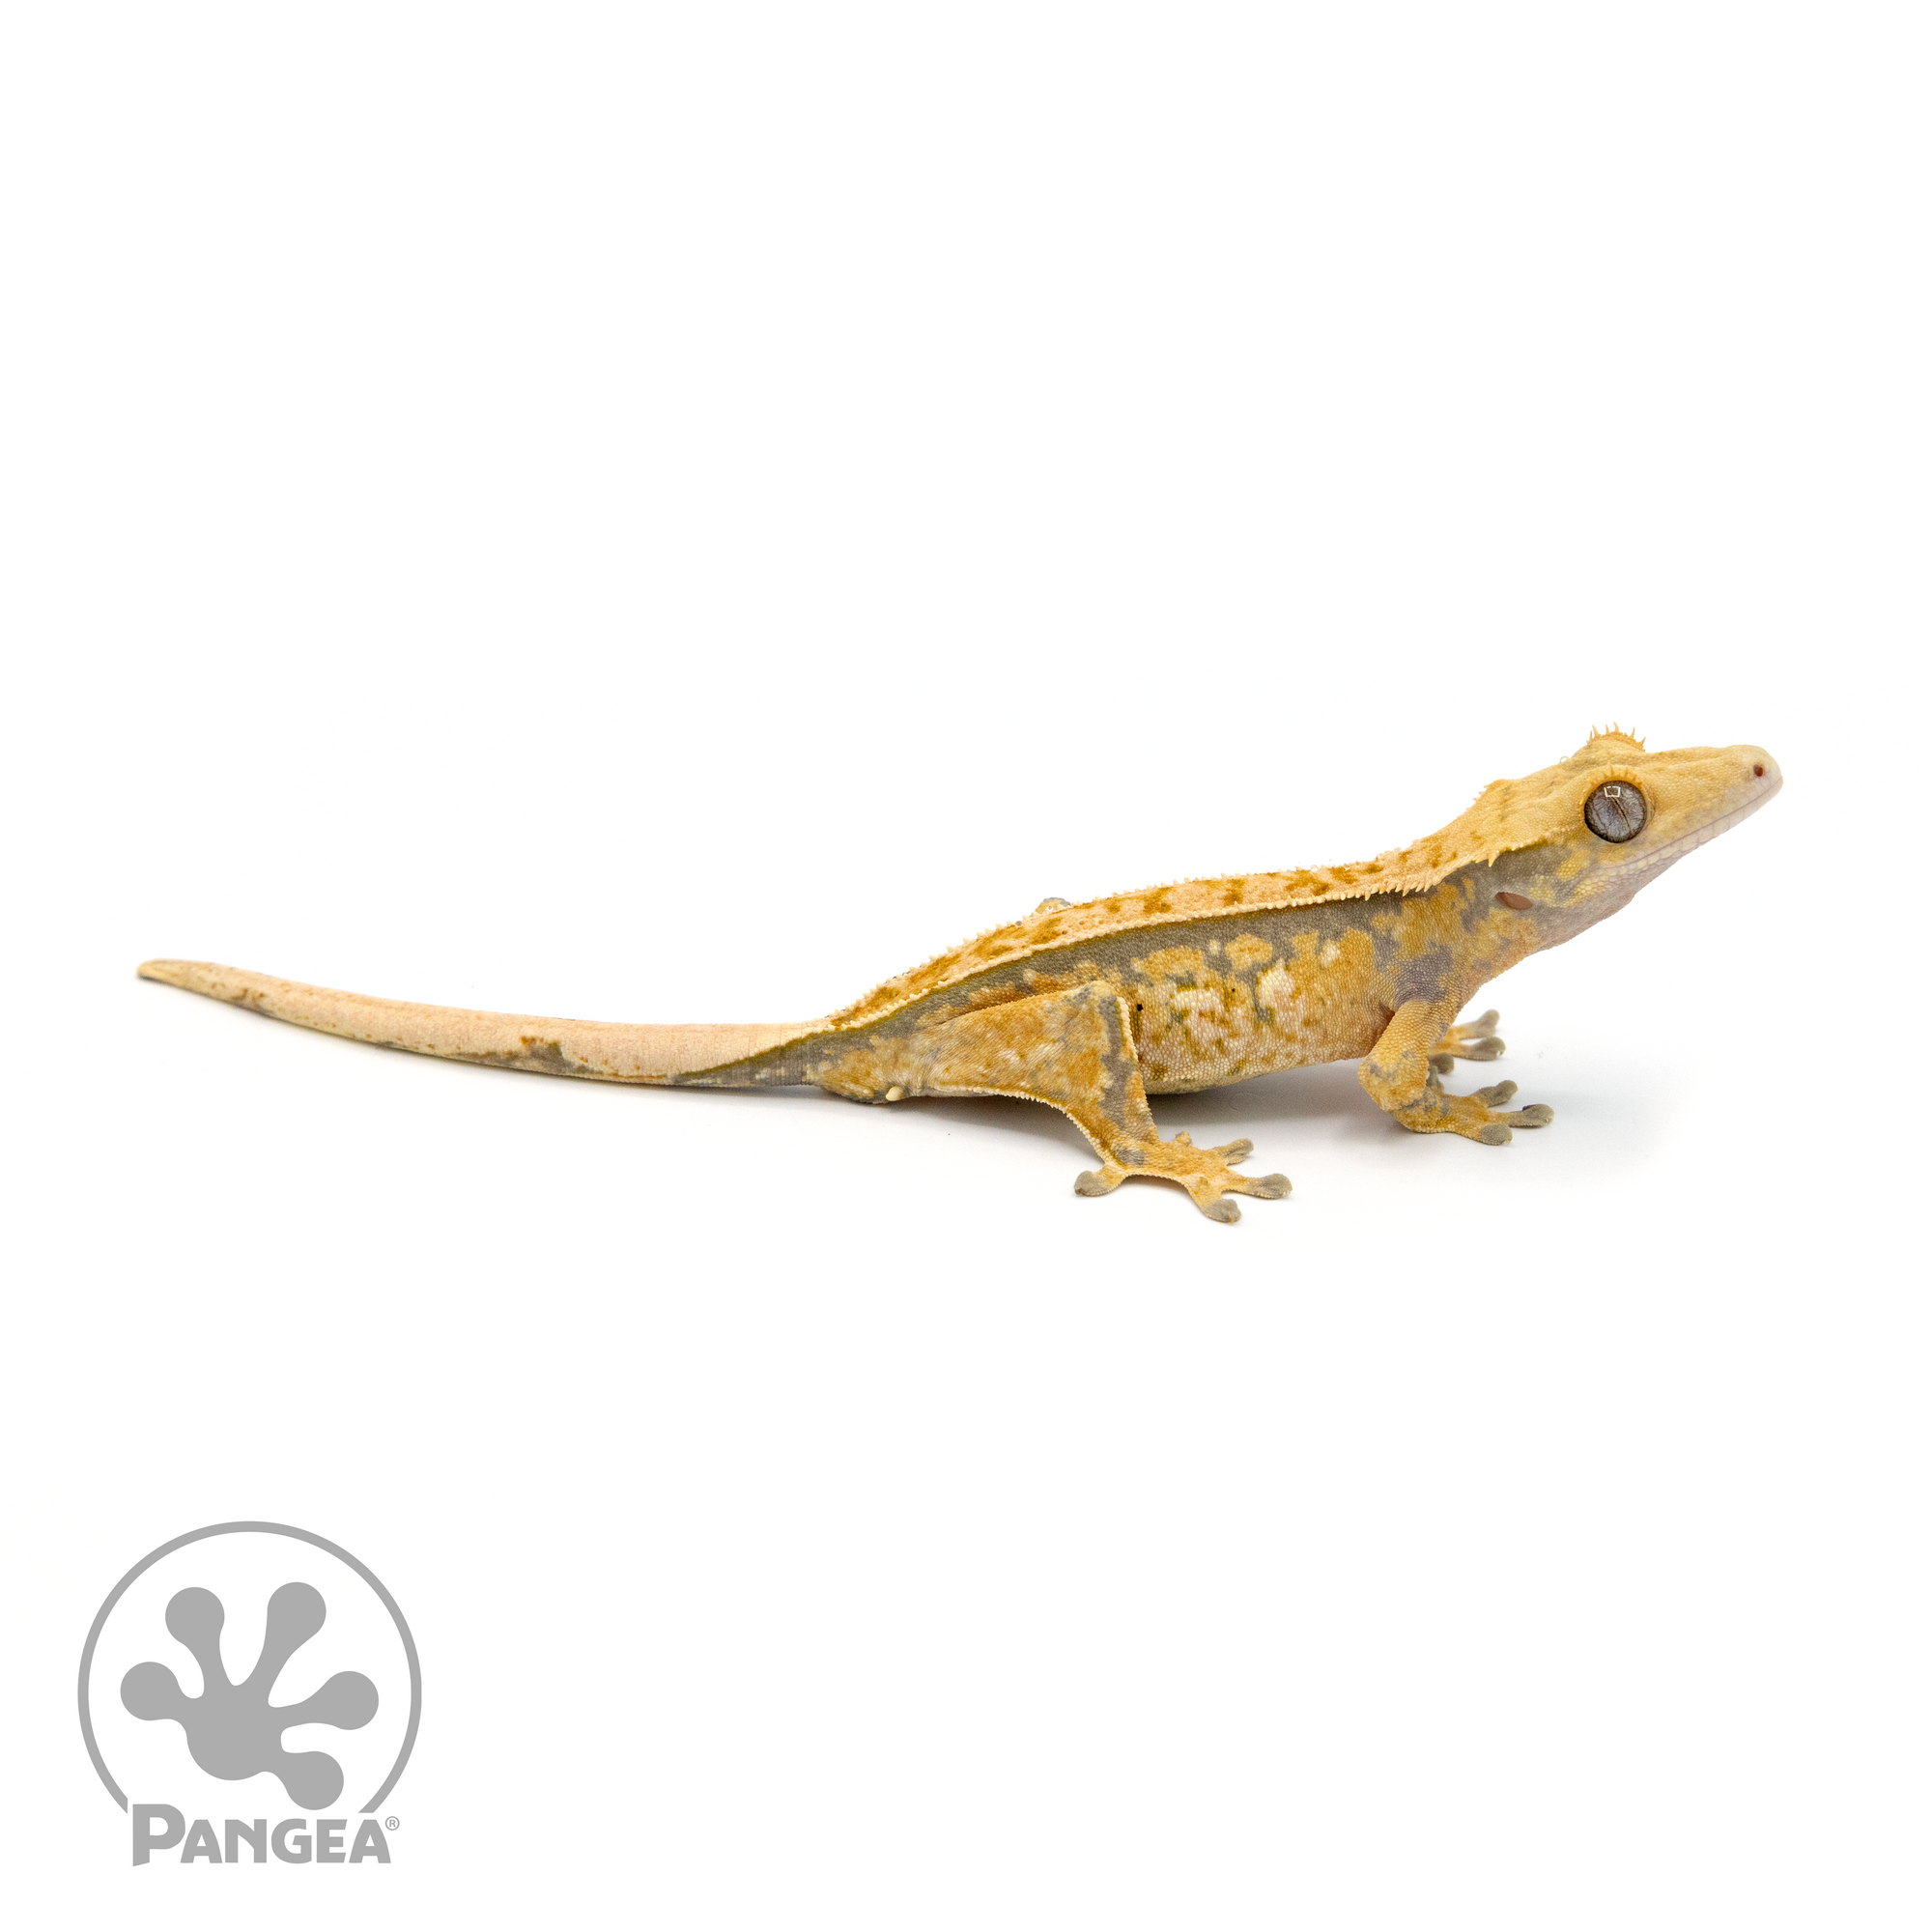 Male Tricolor Crested Gecko Cr-1362 looking right 